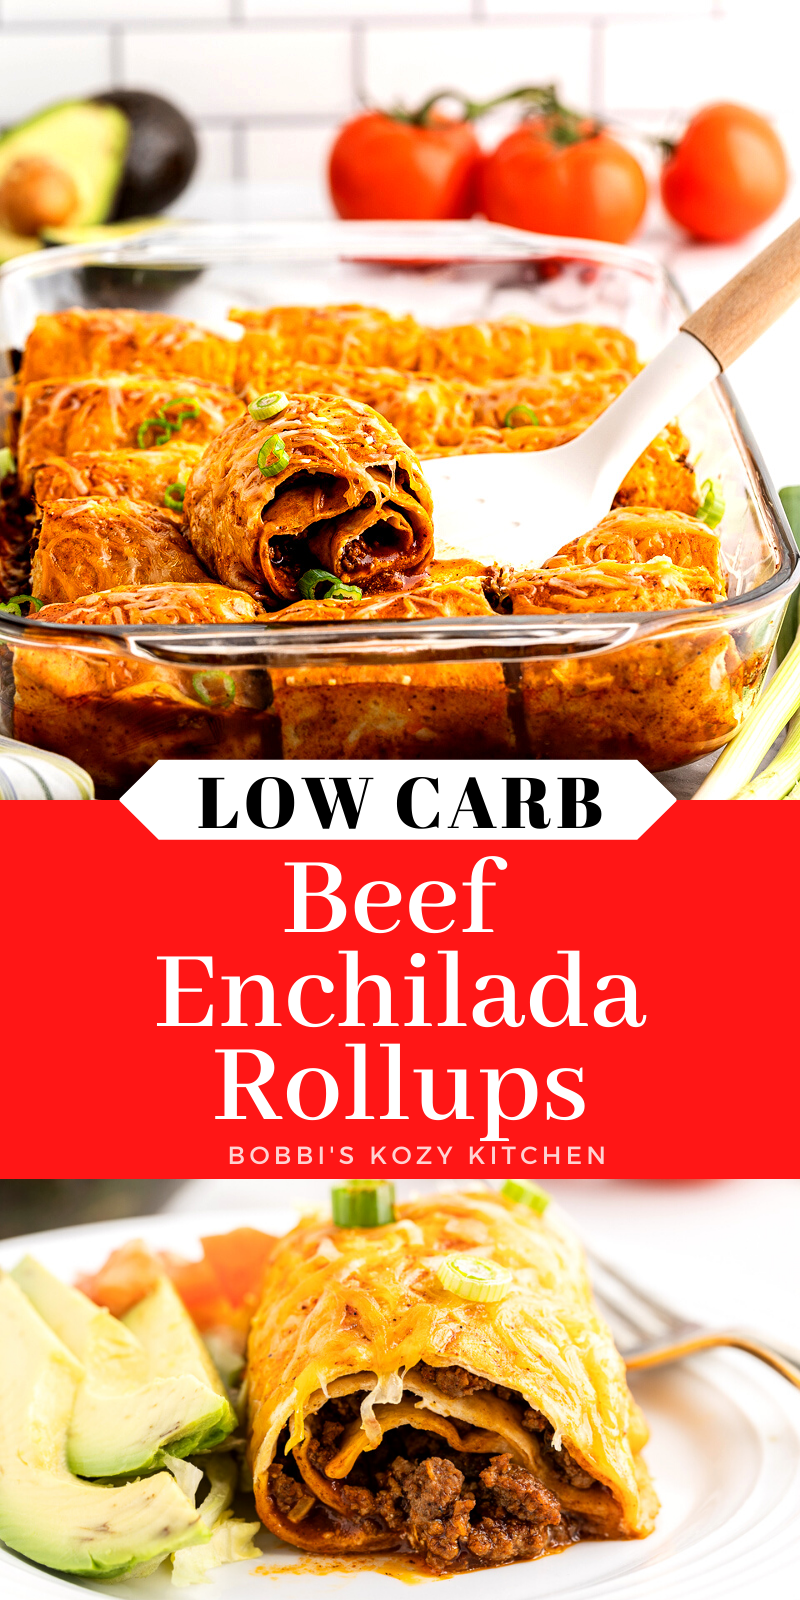 Low Carb Beef Enchilada Rollups - These Low Carb Beef Enchilada Rollups are perfect for when you are craving Mexican food on a low carb or keto diet. Enjoy all the flavor of traditional beef enchiladas minus all the carbs! They are perfect for easy weeknight meals or for your next gathering. #keto #lowcarb #mexican #enchiladas #beef #easy #recipe